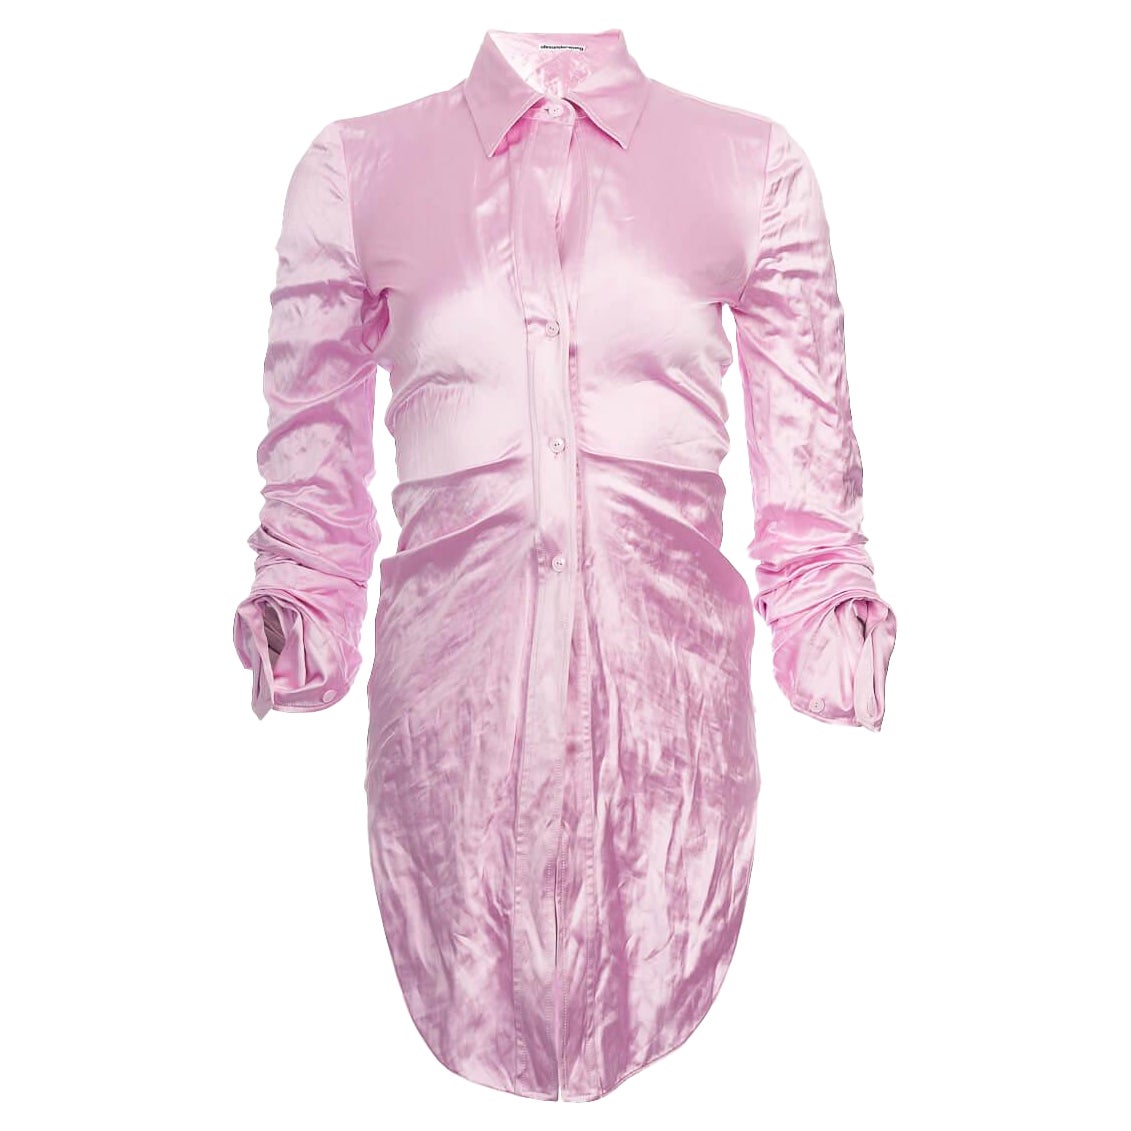 Pre-Loved Alexander Wang Women's Pink Ruched Detail Satin Shirt For Sale